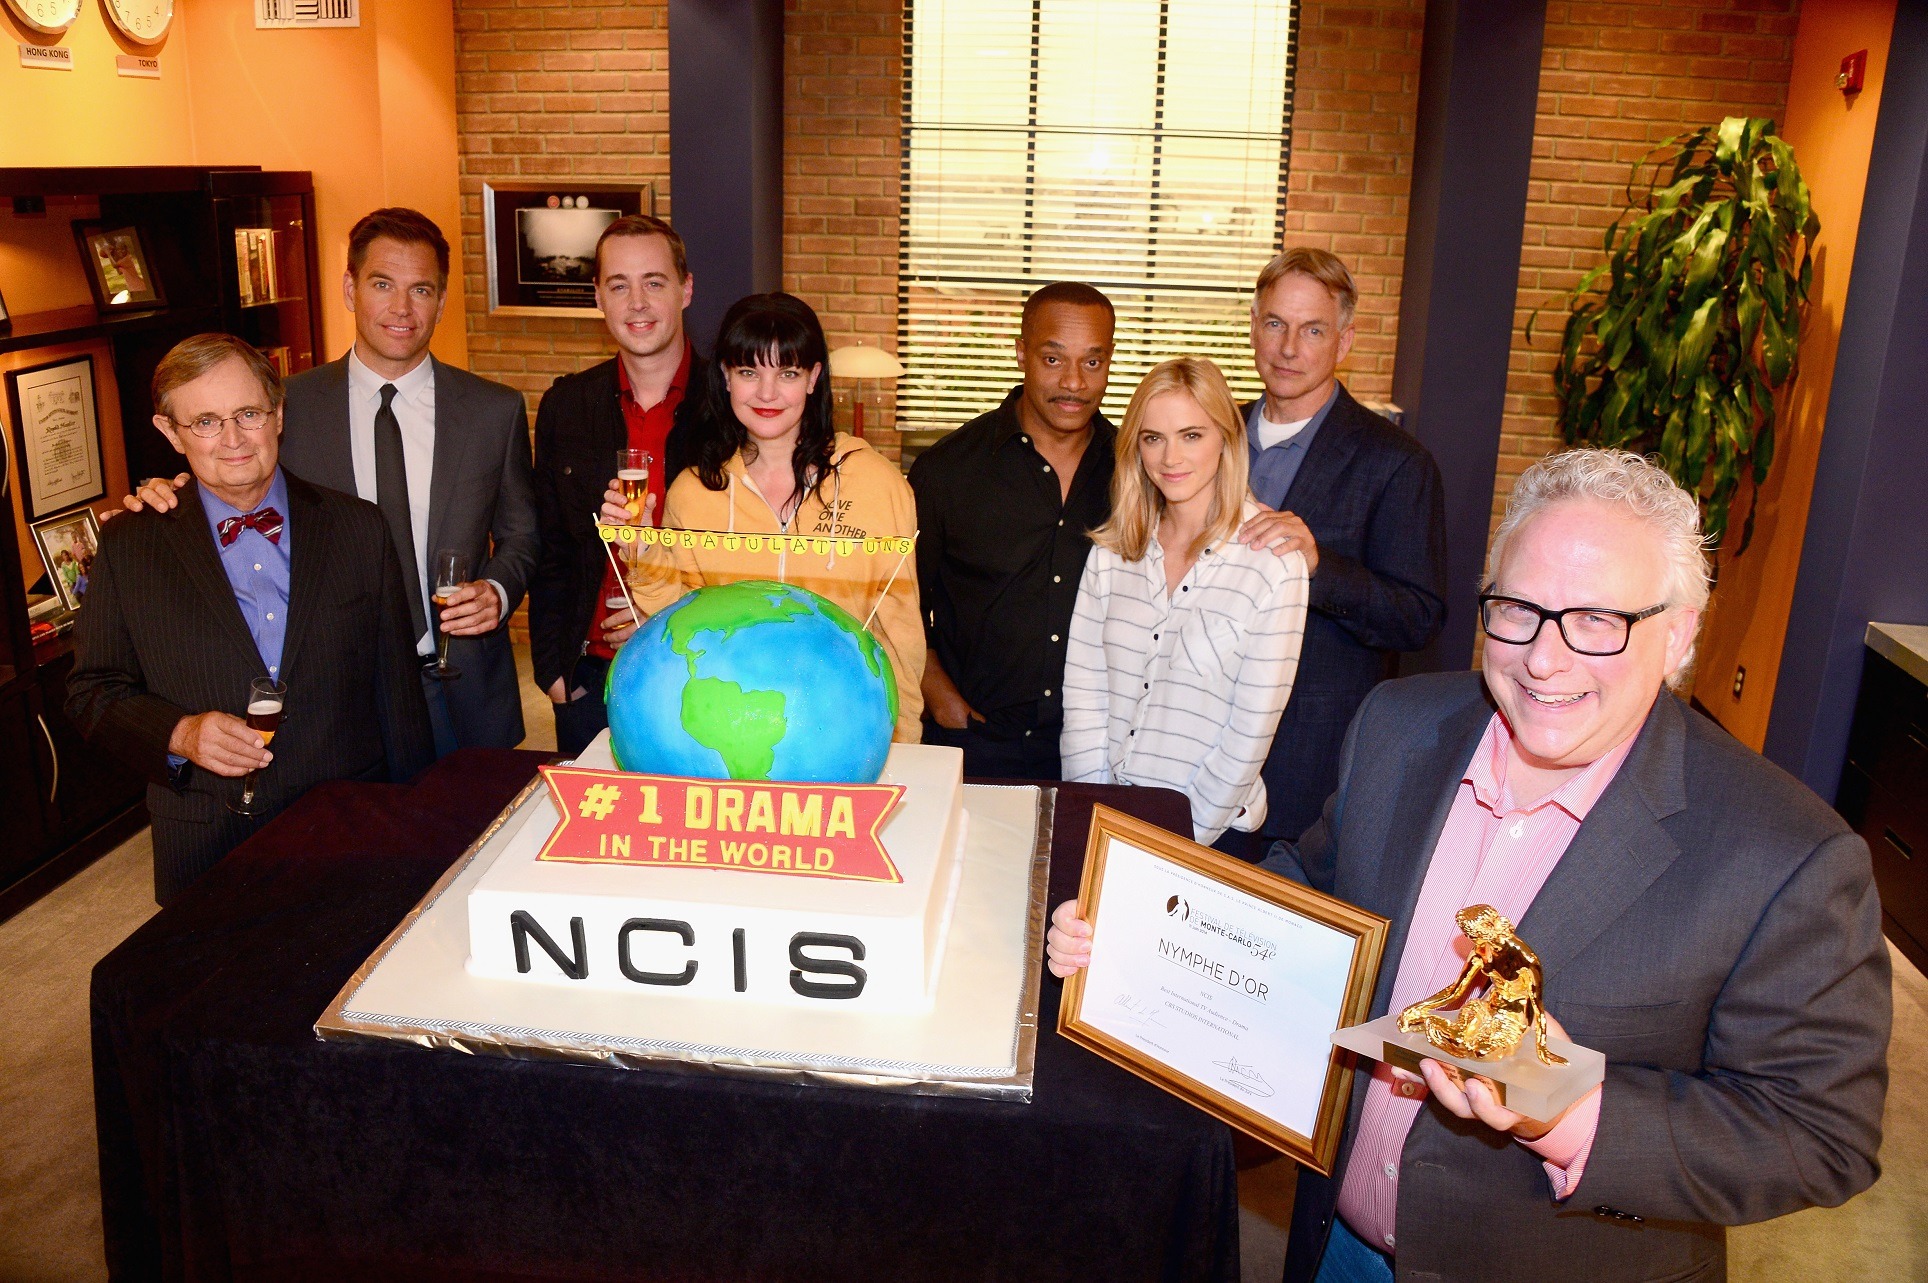 Pauley Perrette and Michael Weatherly with some of their NCIS cast mates.